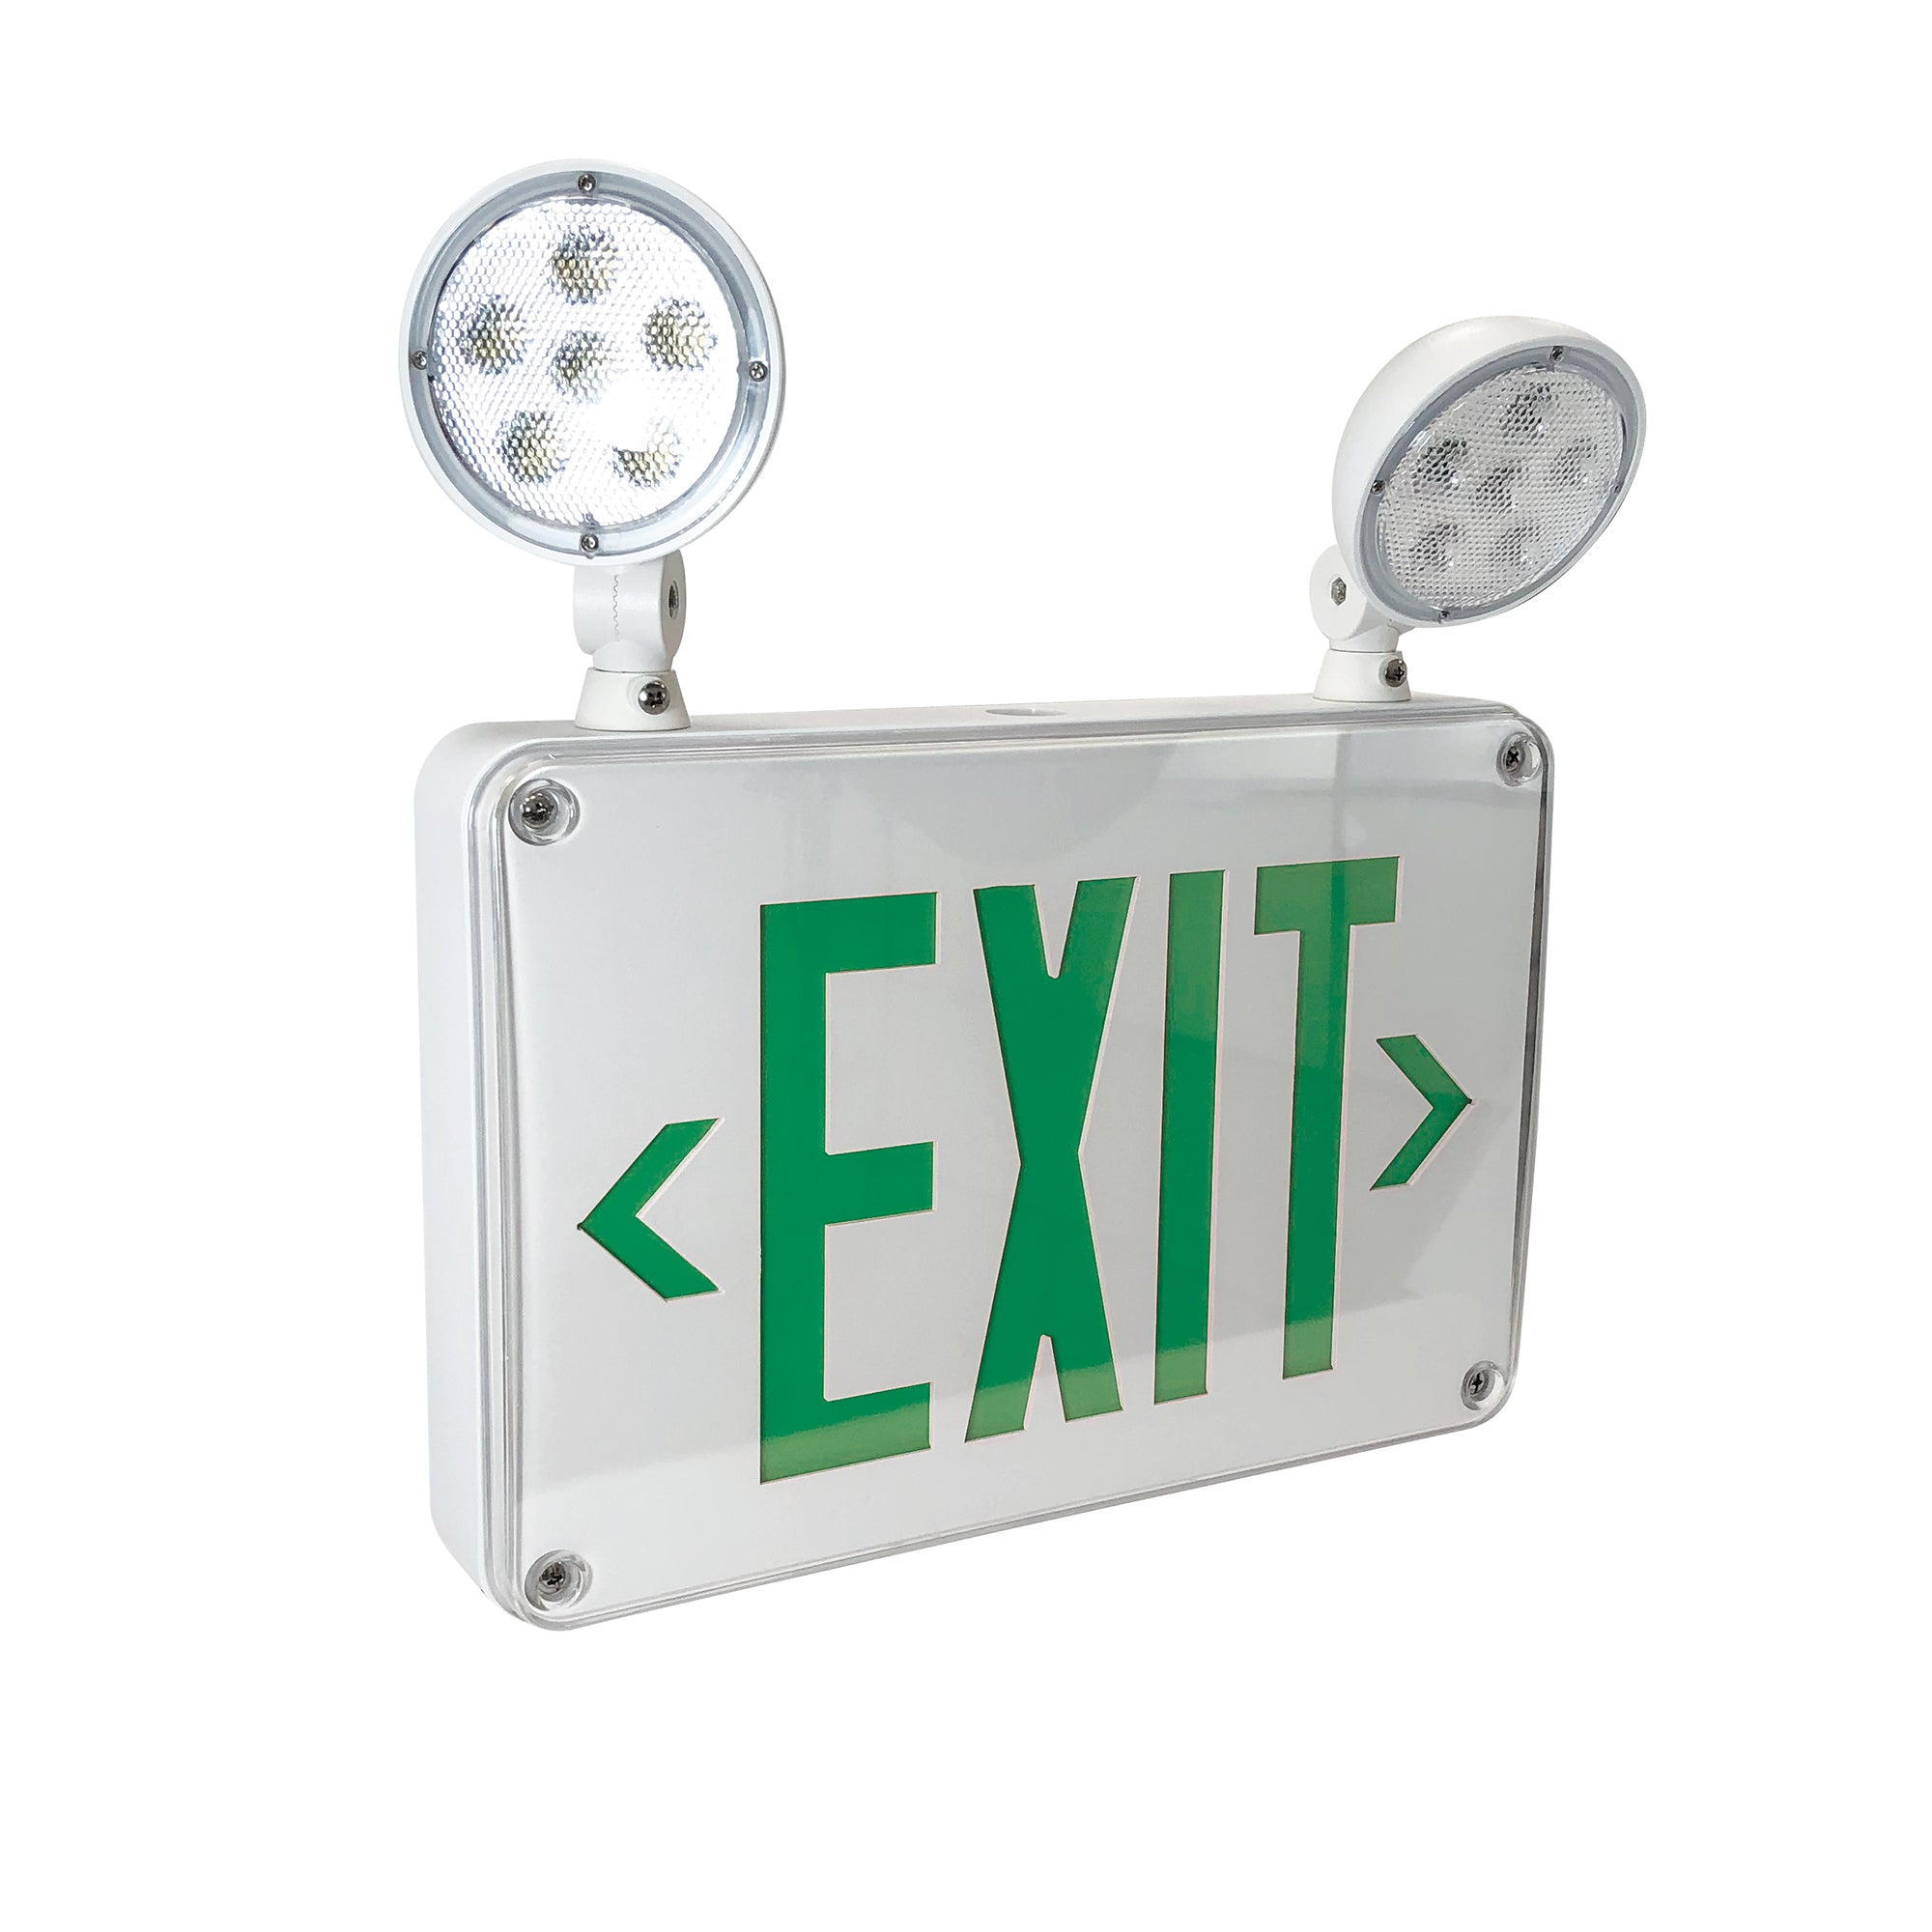 Nora Lighting NEX-720-LED/G LED Self-Diagnostic Wet Location Exit & Emergency Sign With Battery Backup & Remote Capability Housing With Green Letters - White